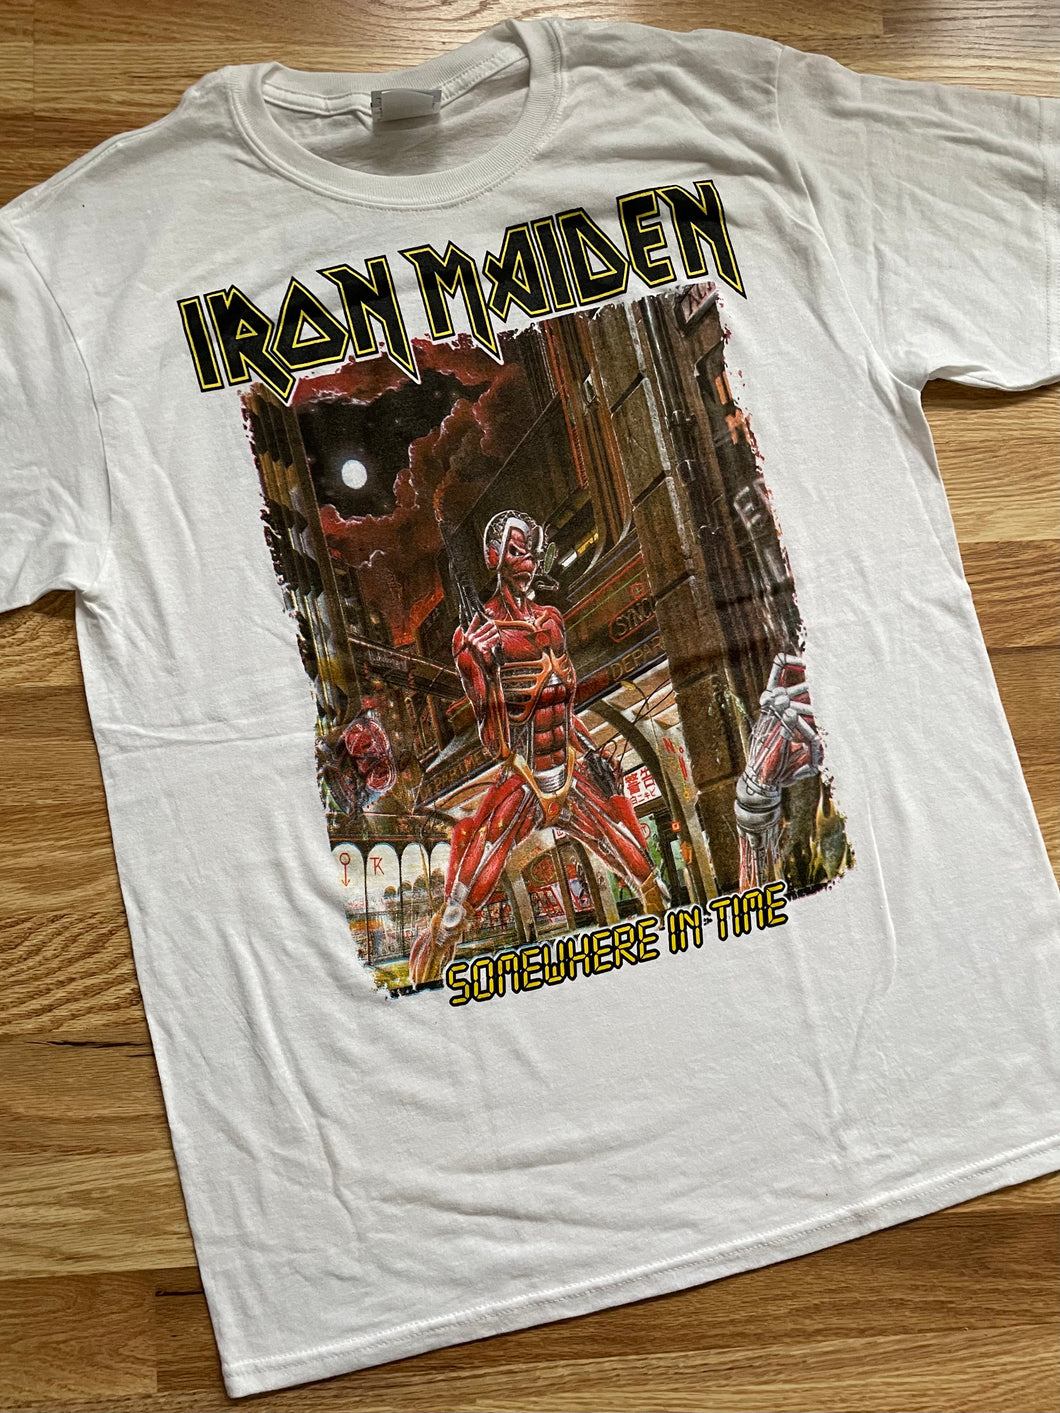 Iron Maiden - Somewhere in time Shirt